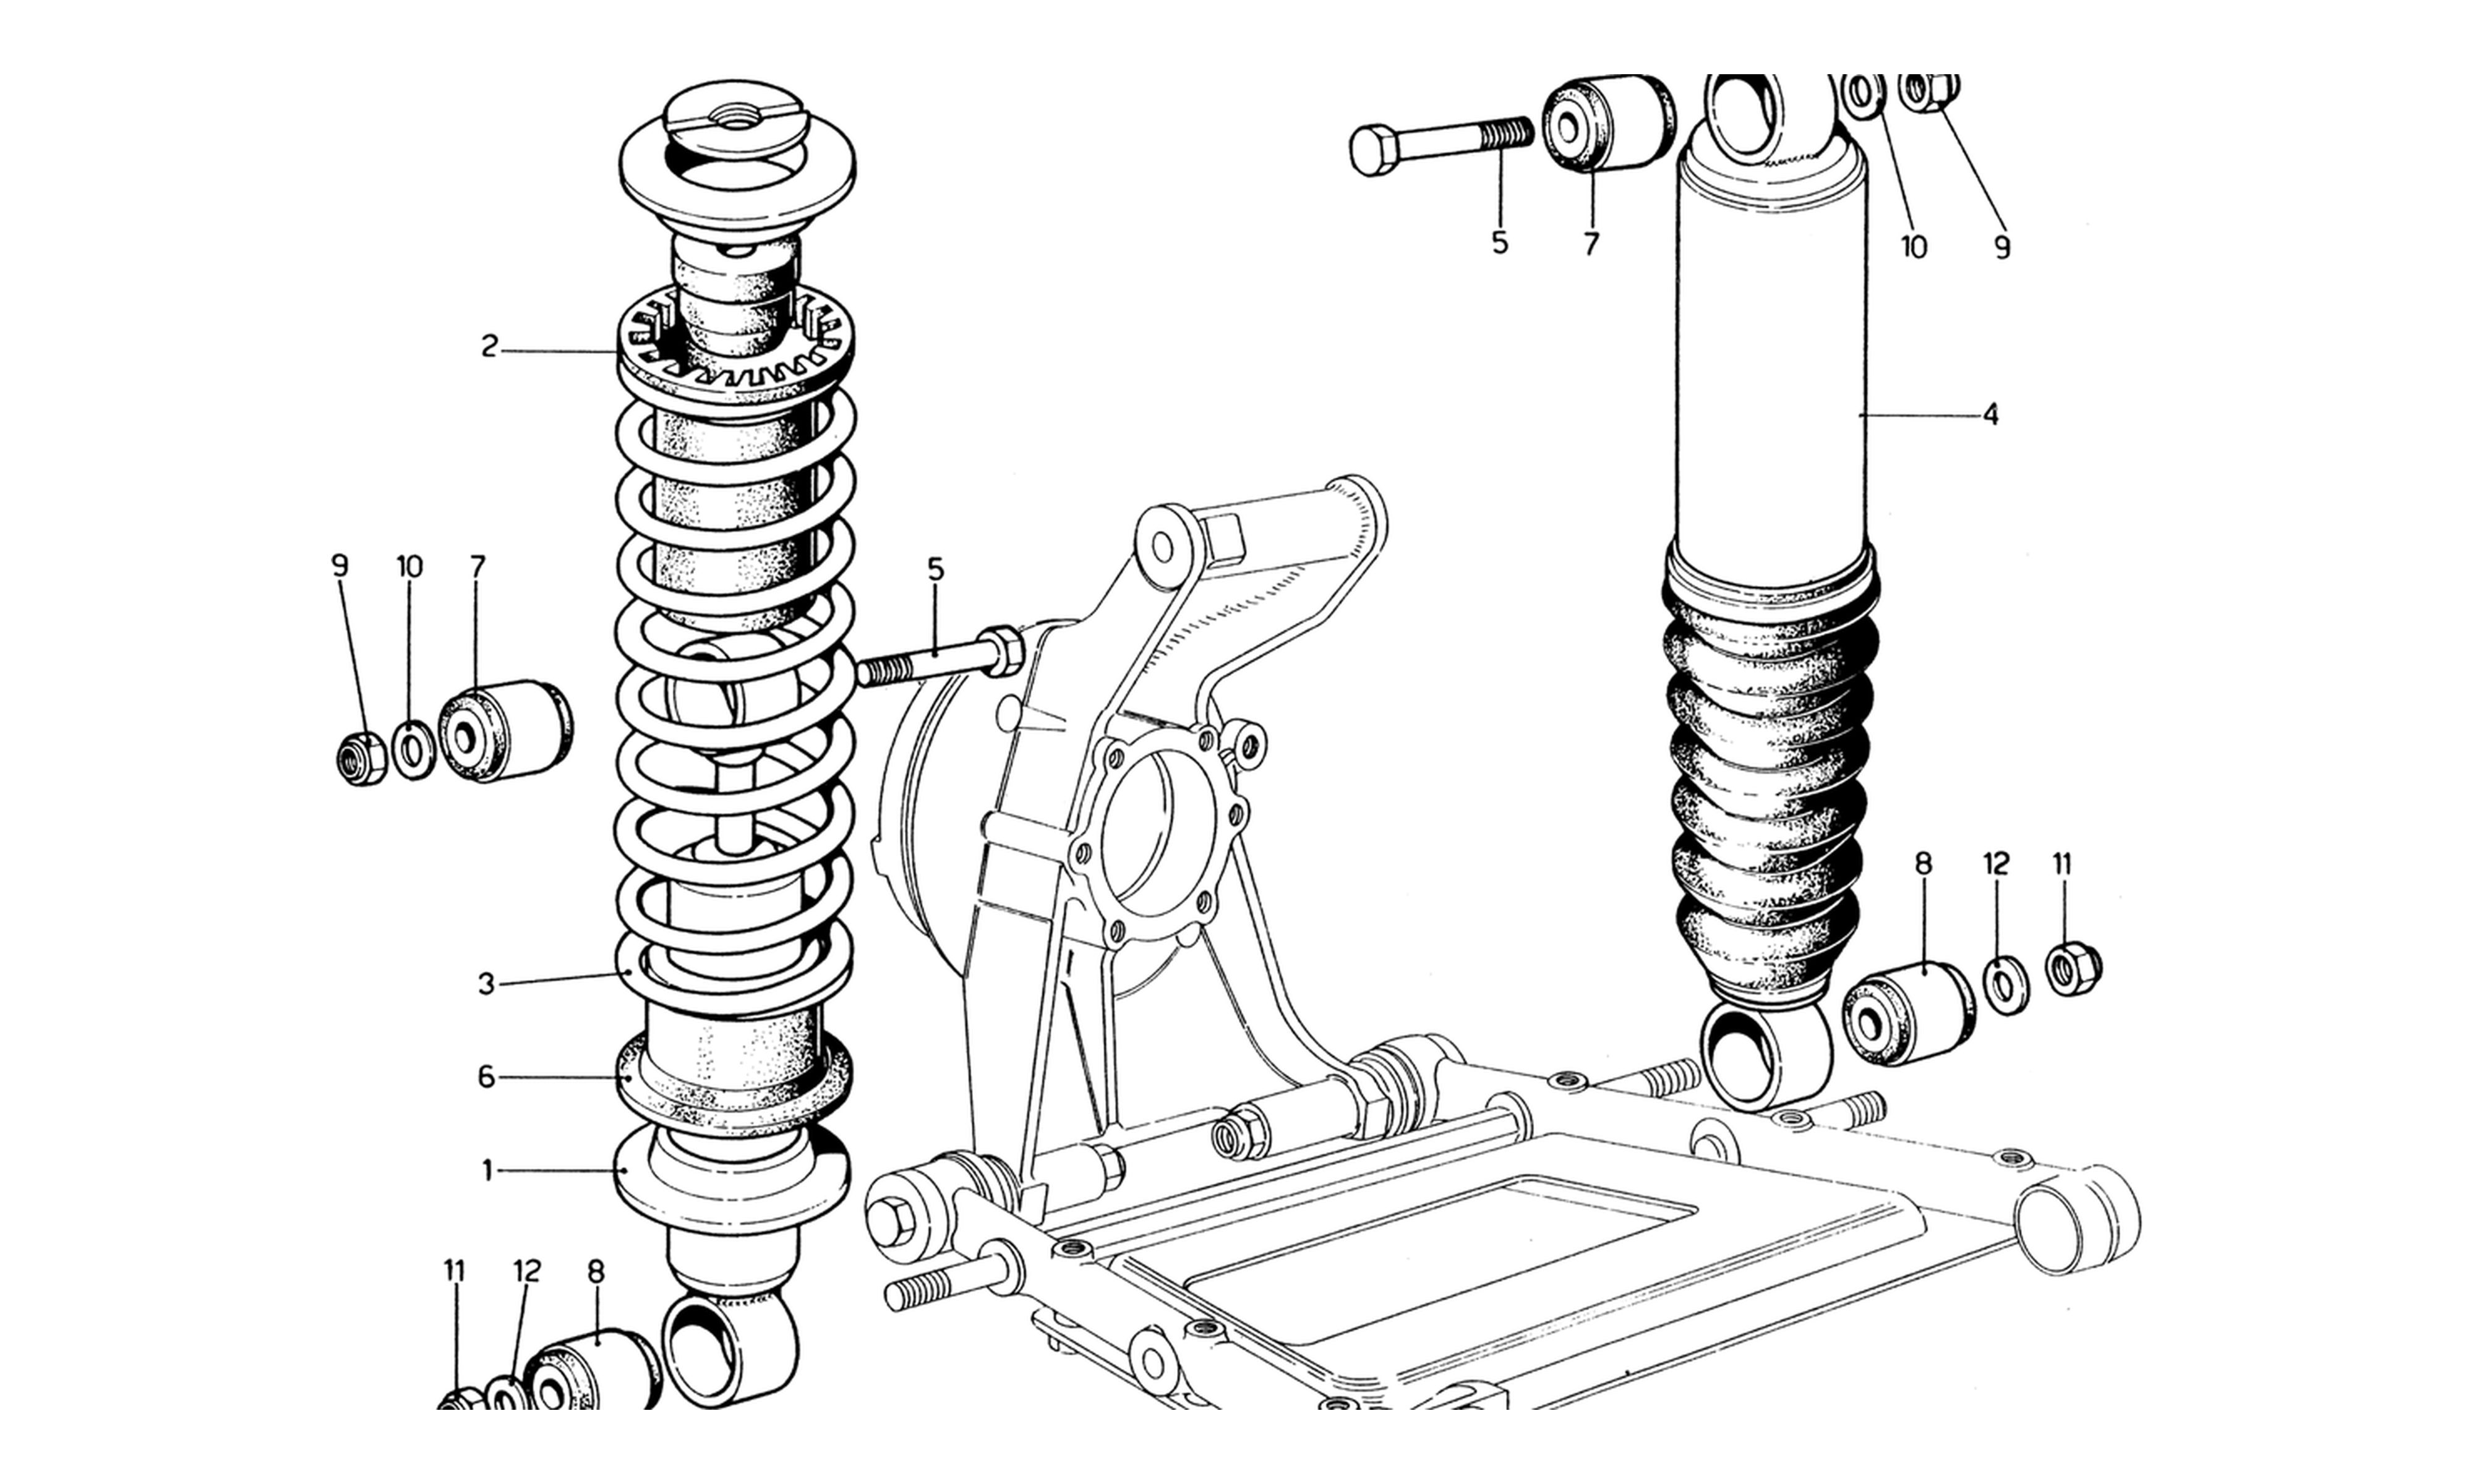 Schematic: Rear Suspension - Shock Absorber And Self-Levelling Unit